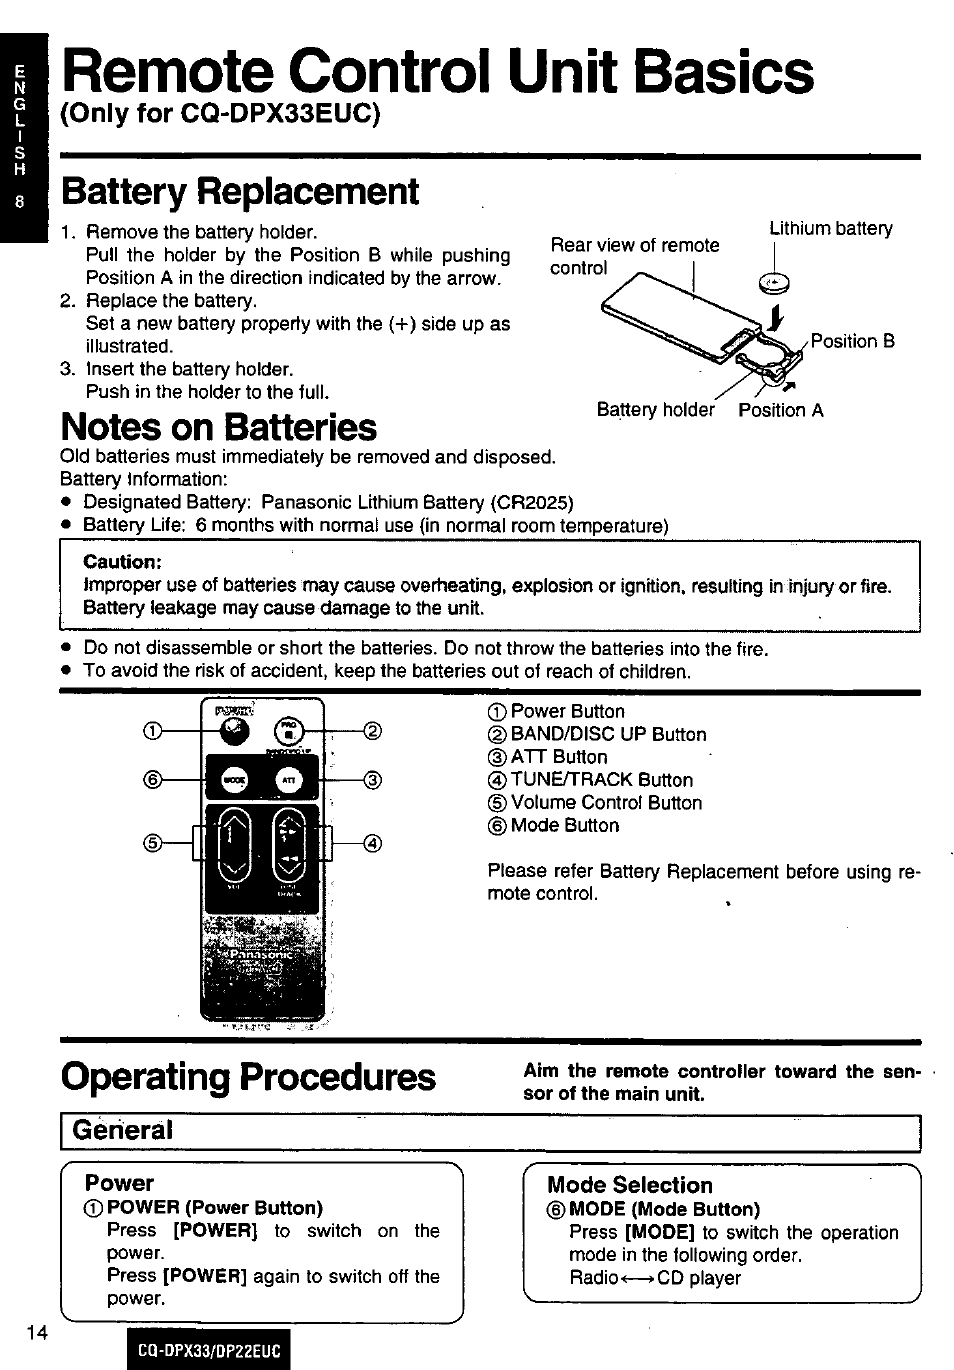 Remote control unit basics, Only for cq-dpx33euc), Battery replacement | Notes on batteries, Operating procedures, General, Power, Mode selection | Panasonic CQ-DPX33 DP22EUC Manuel d'utilisation | Page 14 / 48